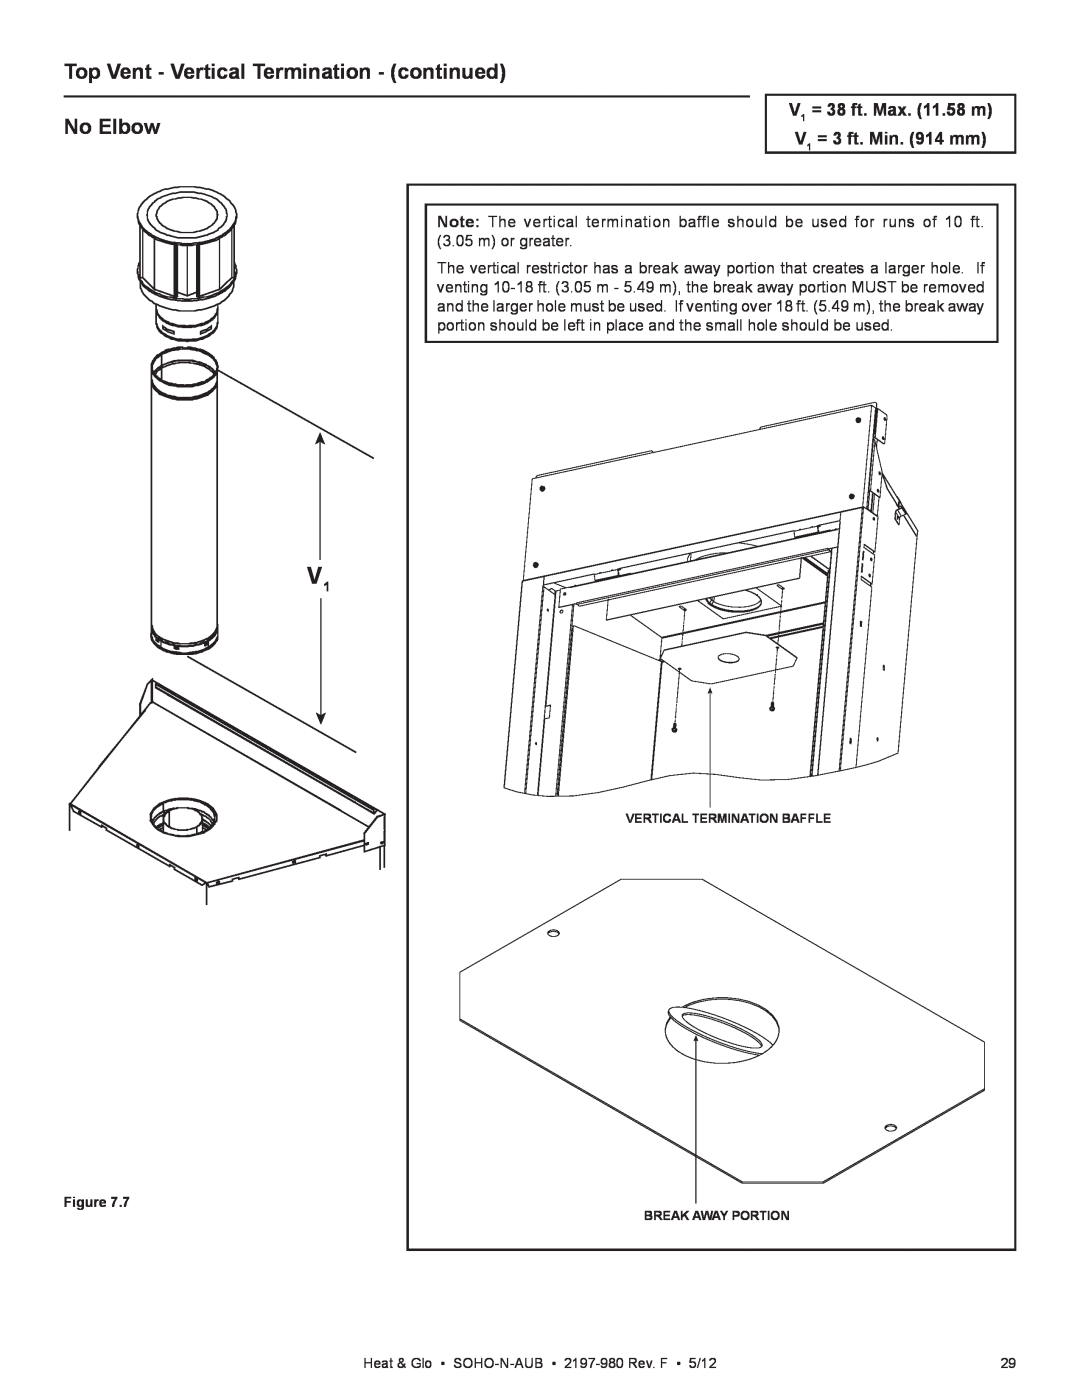 Heat & Glo LifeStyle 2197-980 owner manual Top Vent - Vertical Termination - continued, No Elbow 